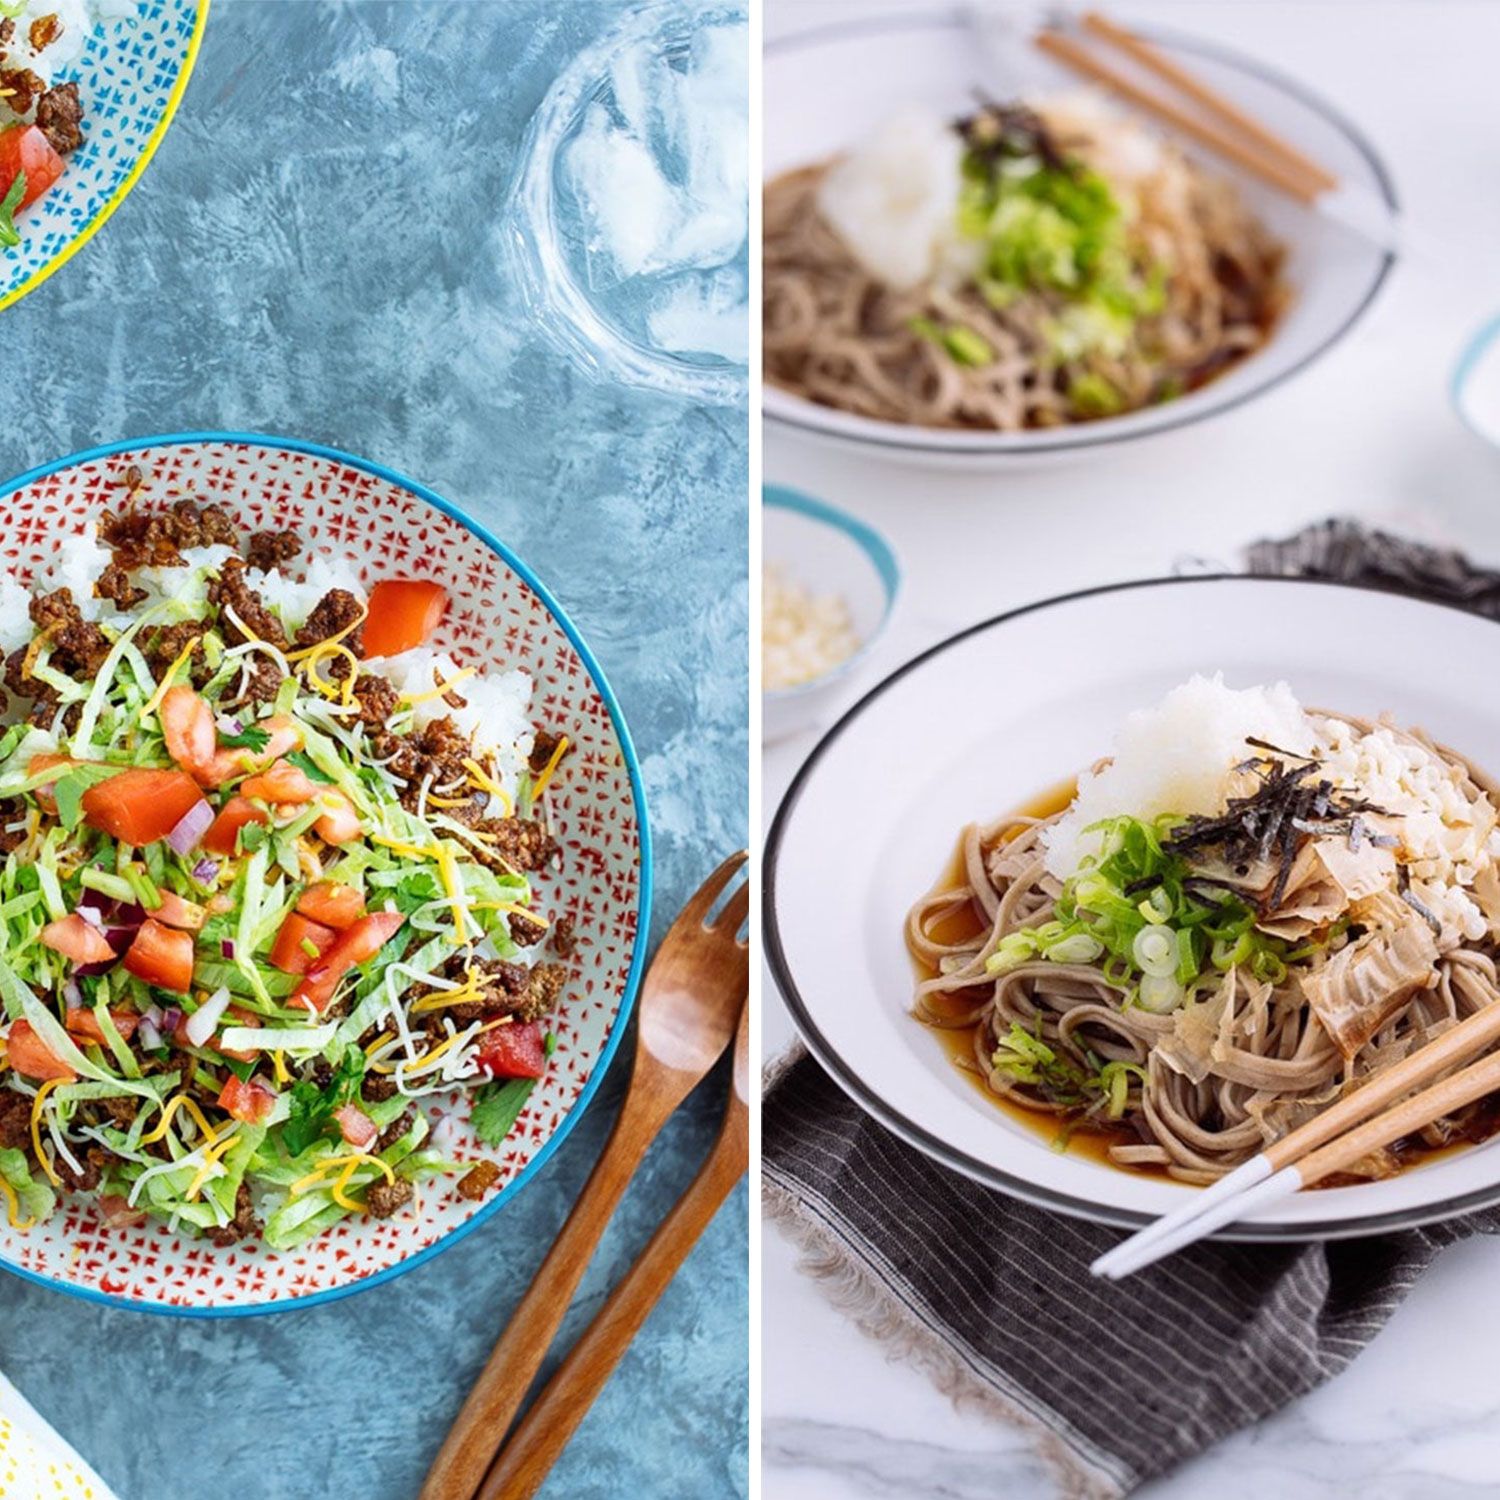 Dish, Food, Cuisine, Ingredient, Noodle, Rice noodles, Produce, Recipe, Hot dry noodles, Chinese food, 